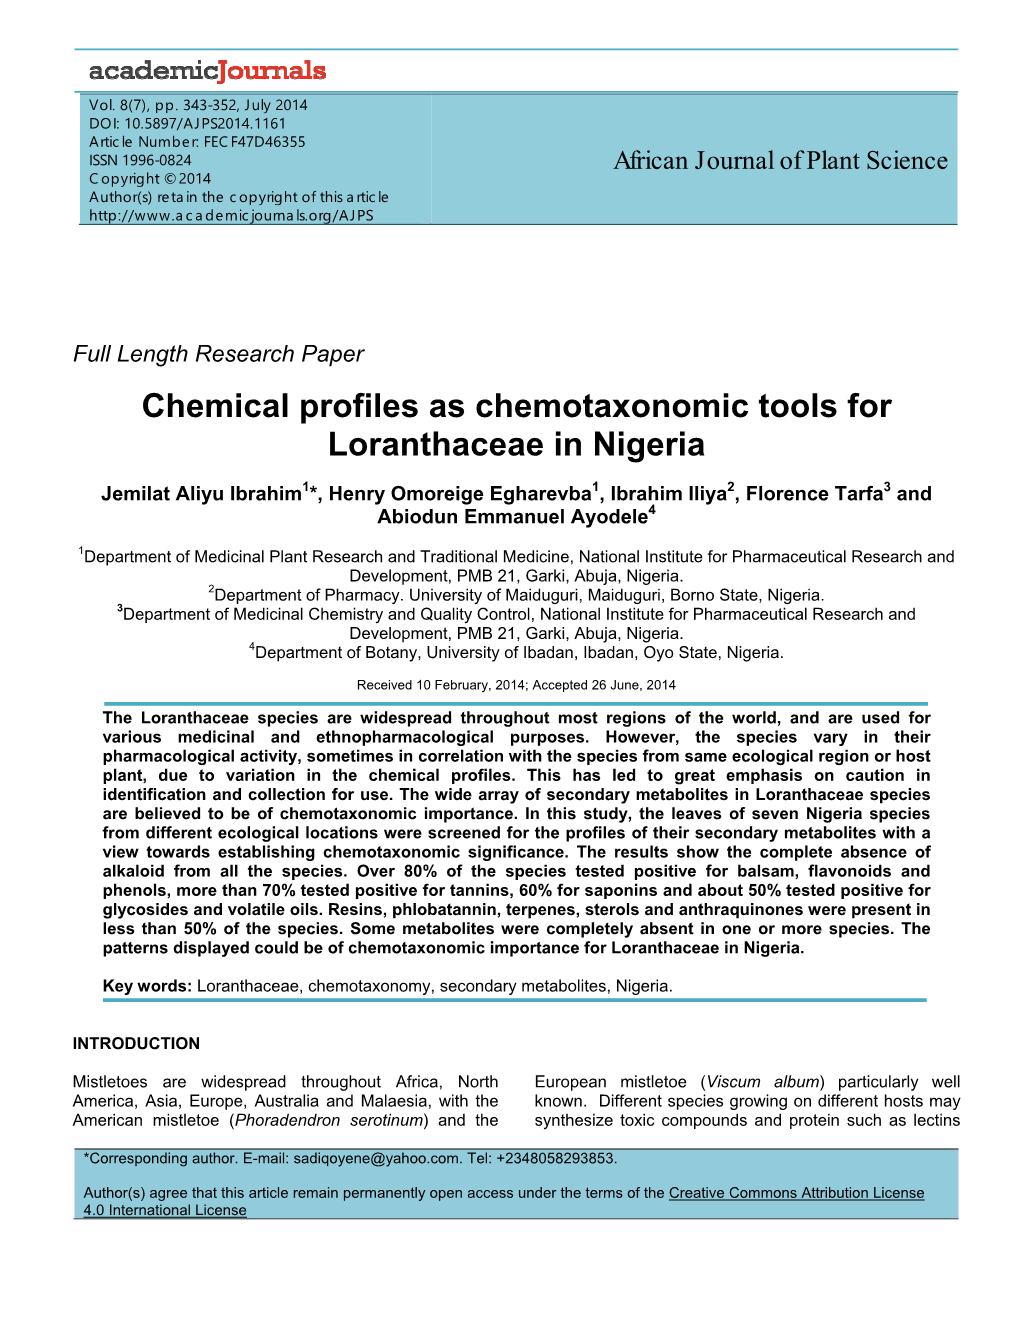 Chemical Profiles As Chemotaxonomic Tools for Loranthaceae in Nigeria